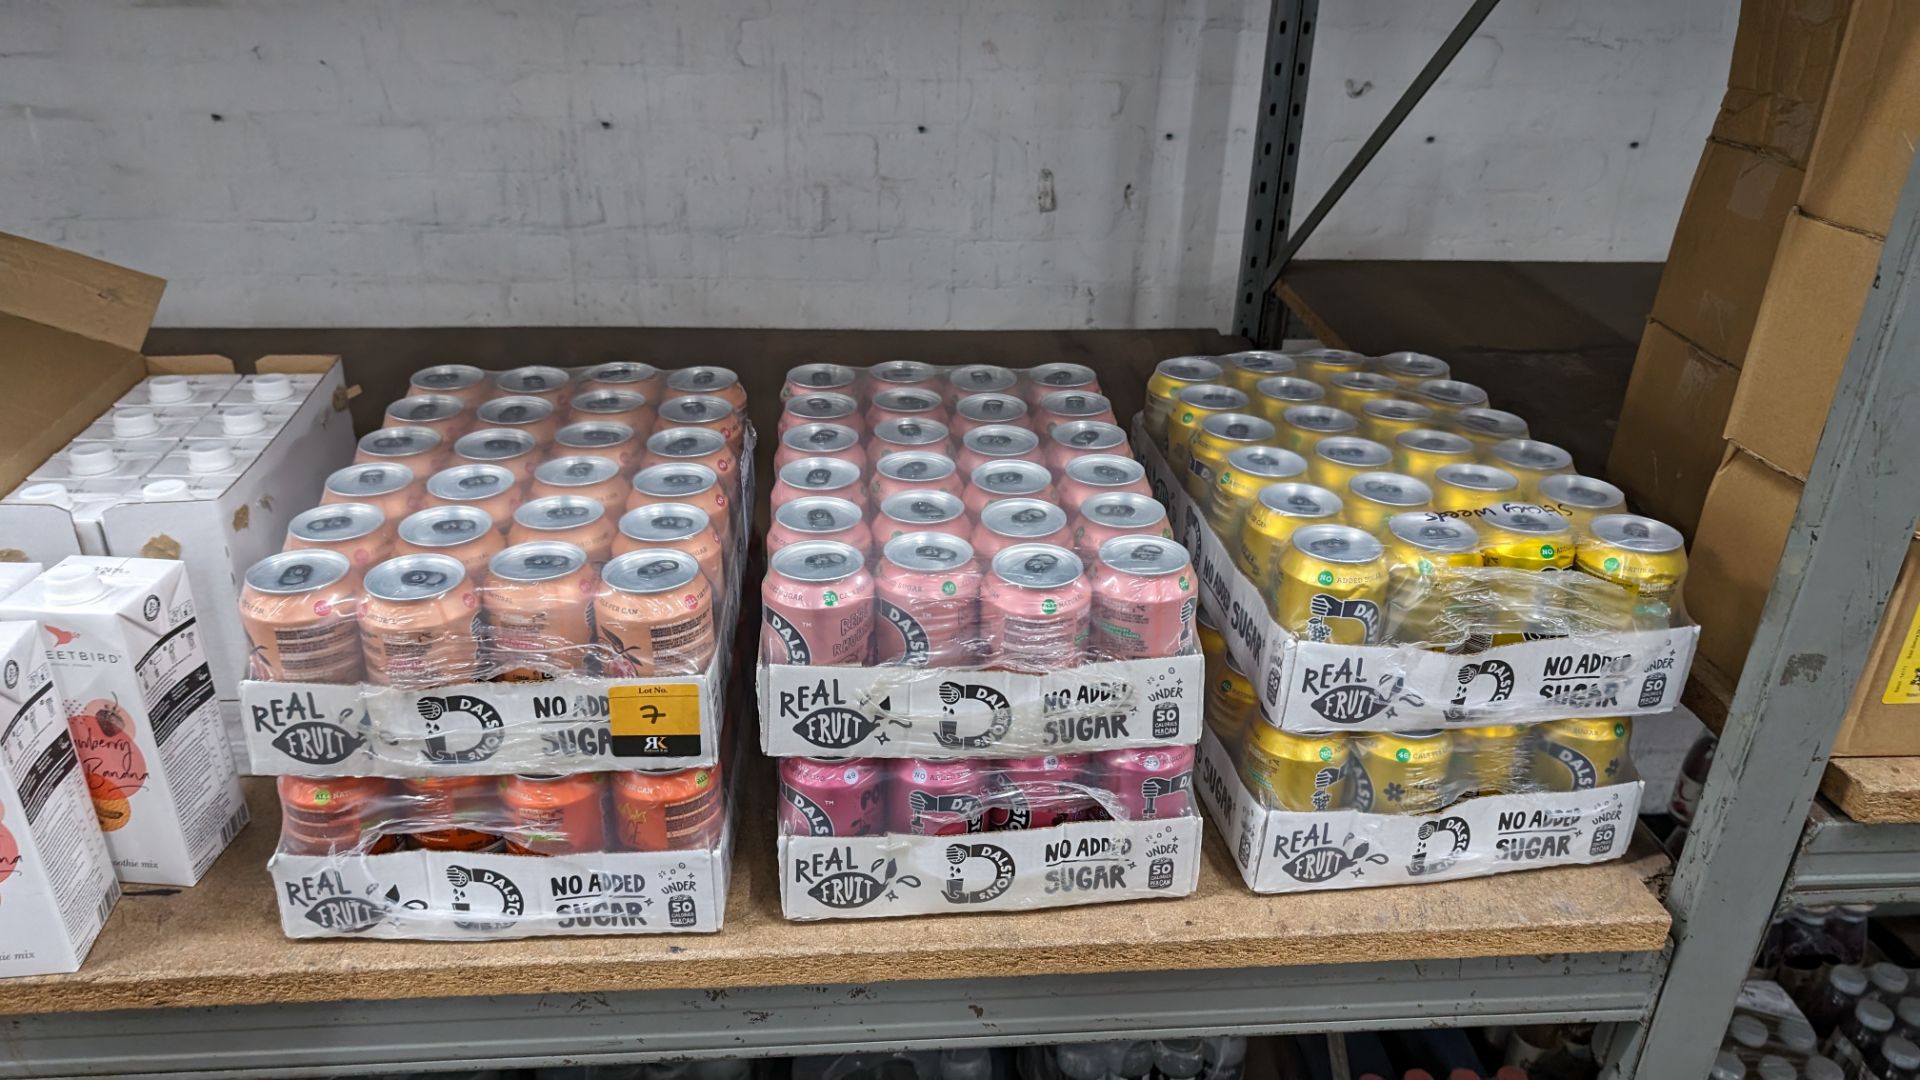 6 cases of Dalston's real fruit no added sugar drinks, each case comprising 24 off 330ml cans. This - Image 2 of 11